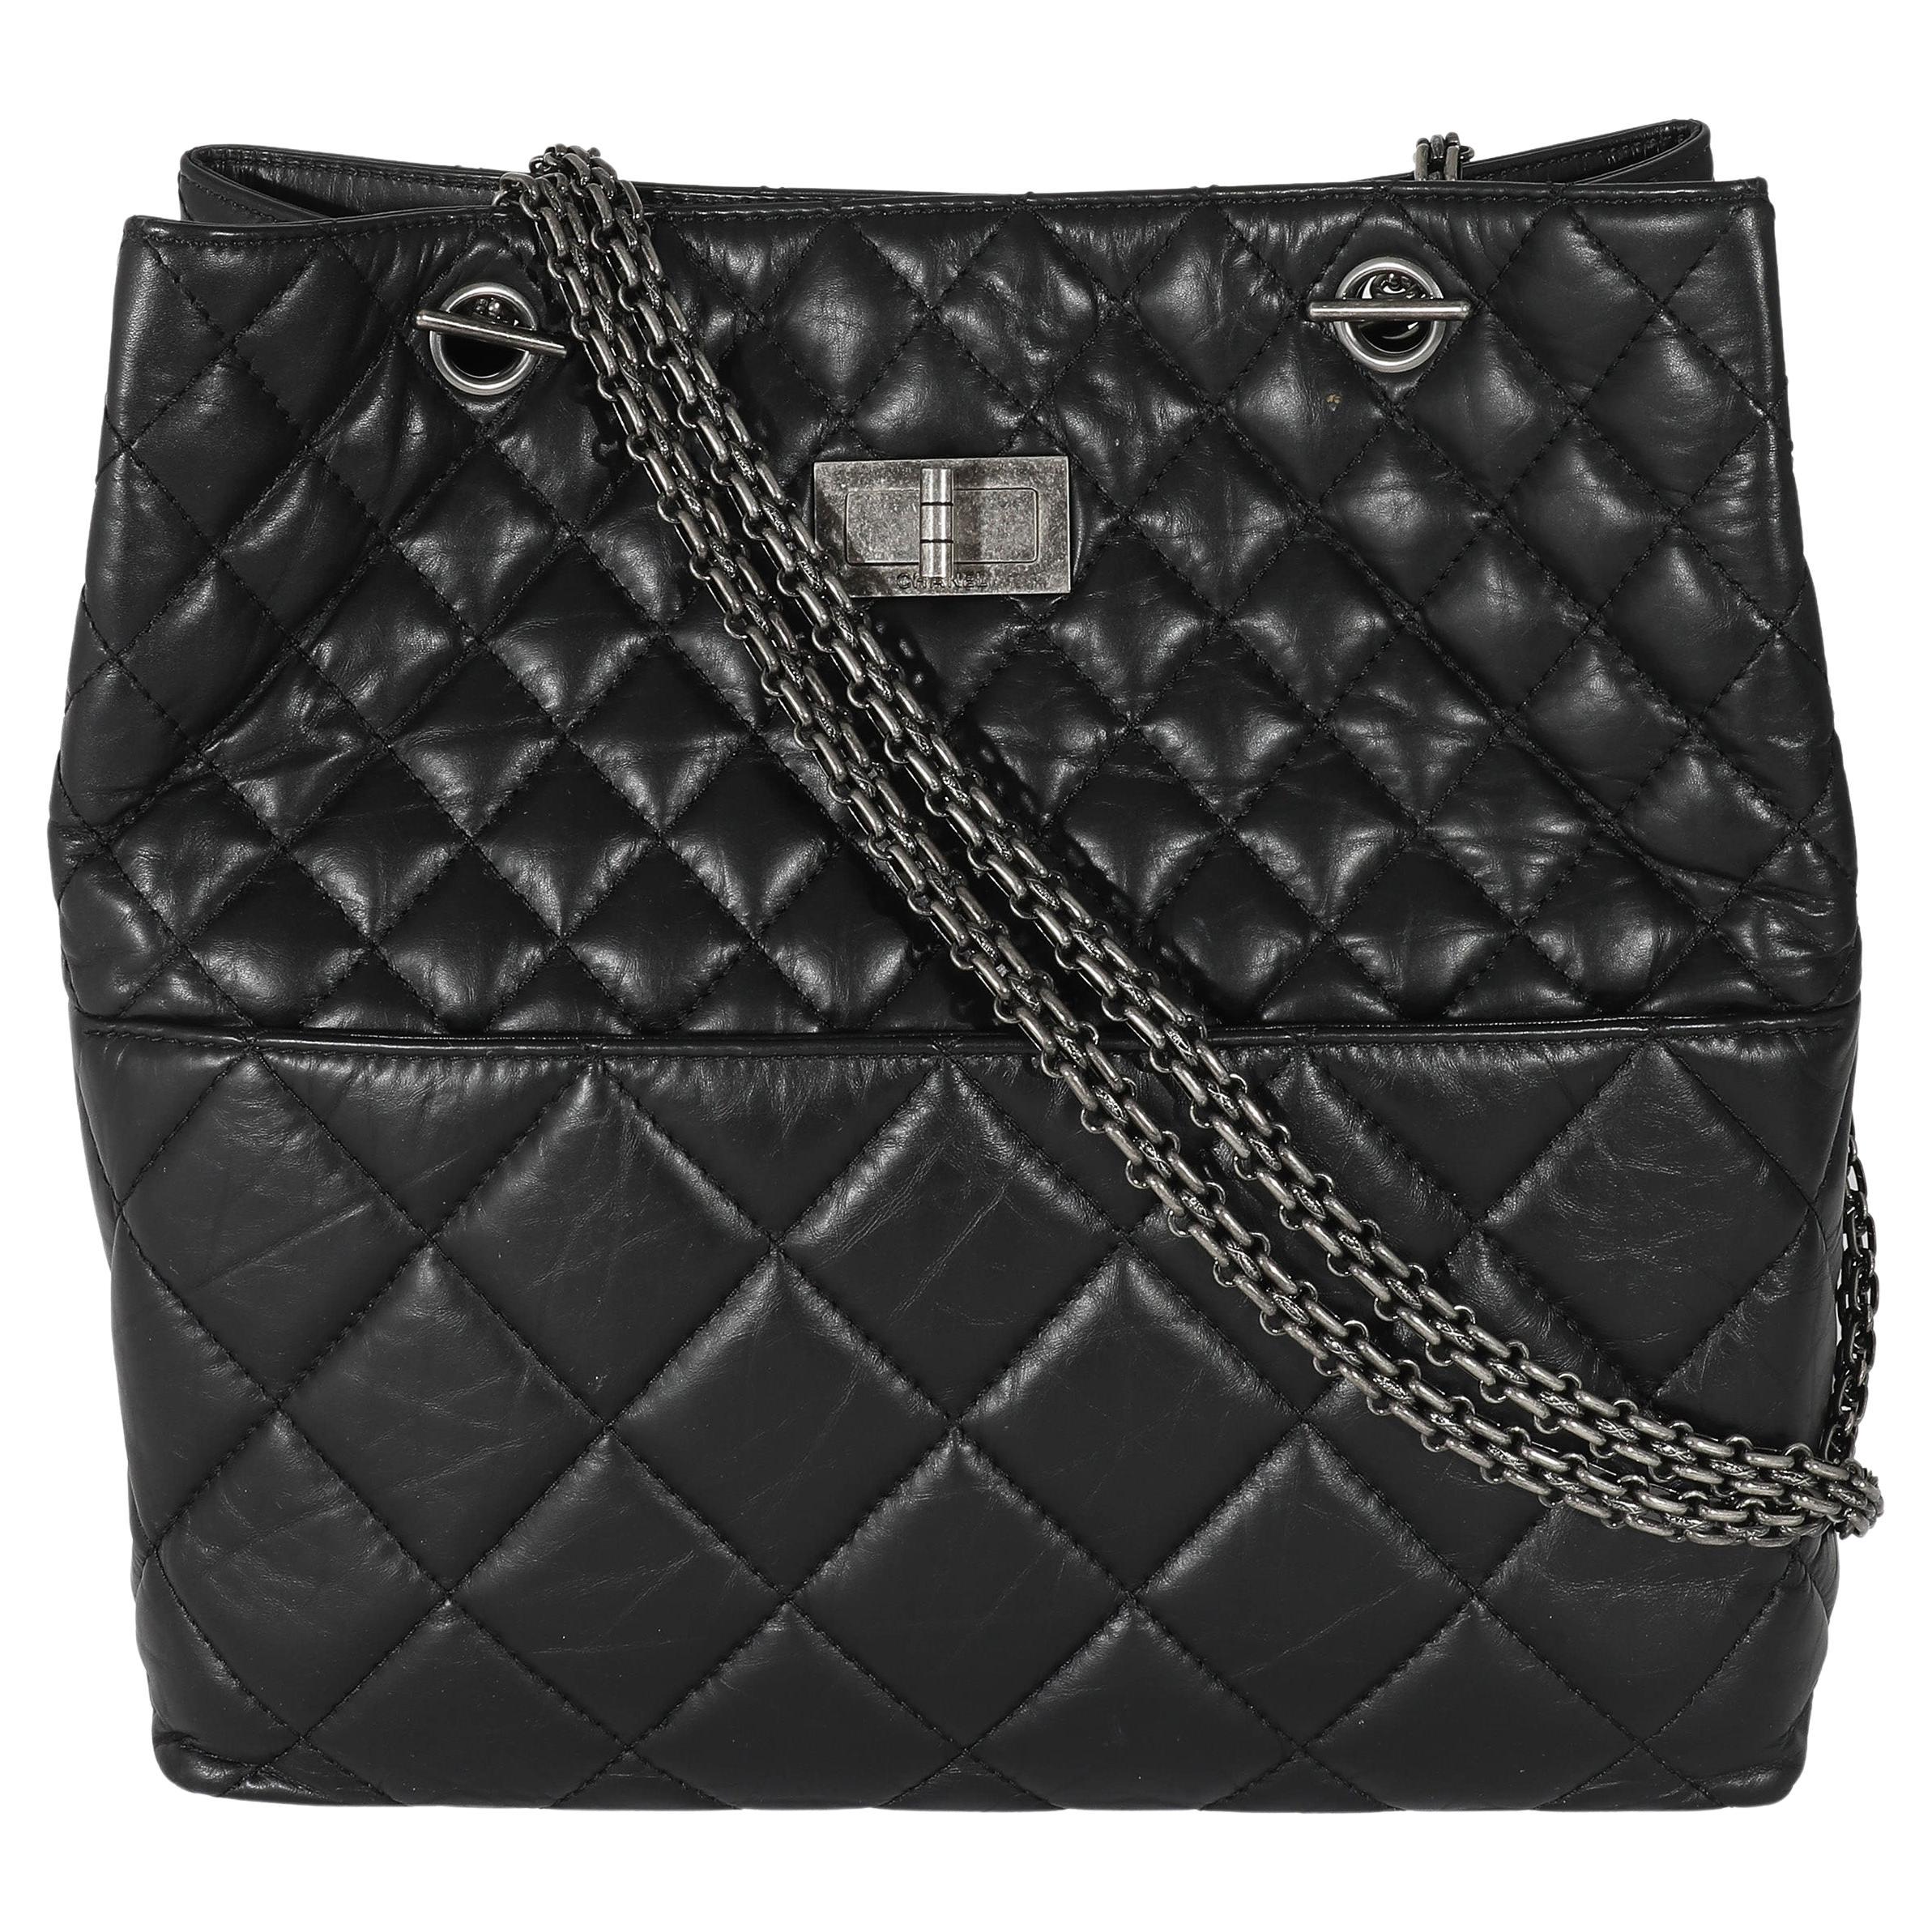 Chanel Black Calfskin Tall 2.55 Reissue Tote For Sale